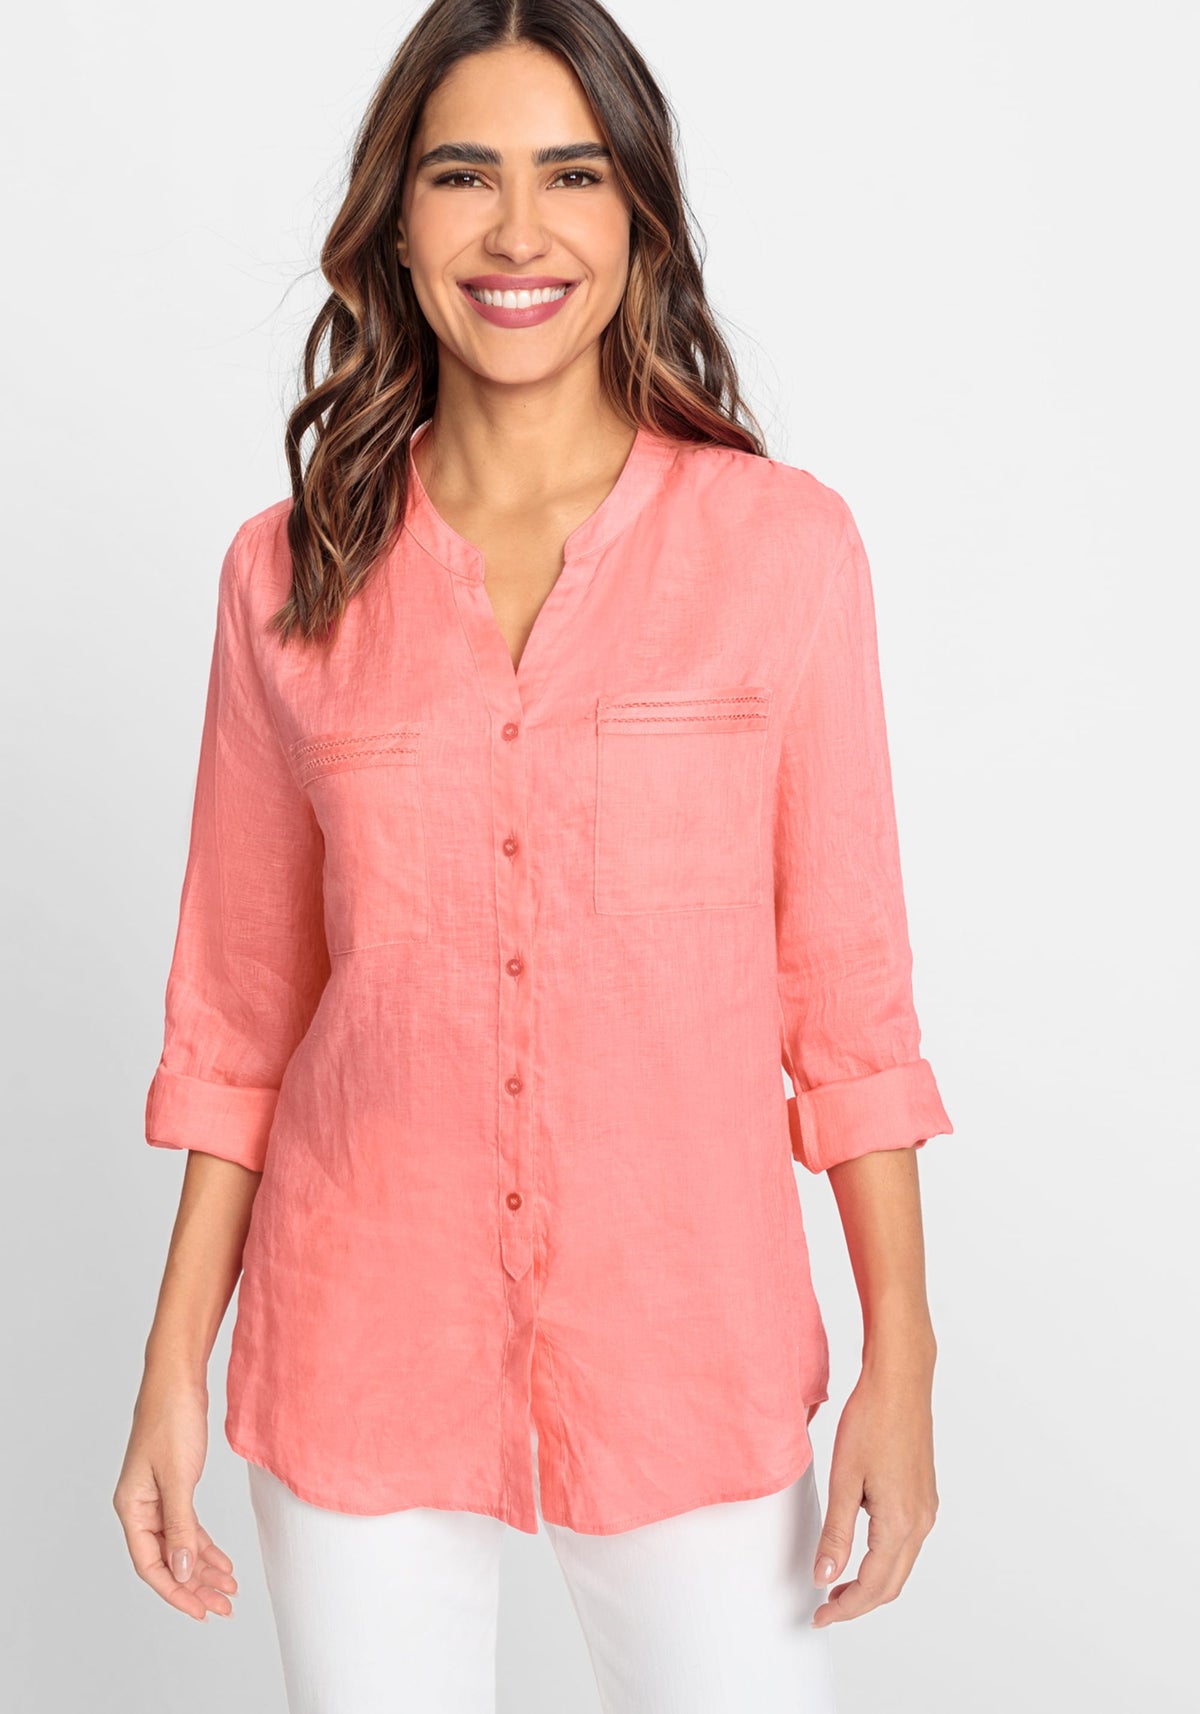 Cotton Linen Long Sleeve Tunic Shirt with Rolled Tab Sleeve Detail